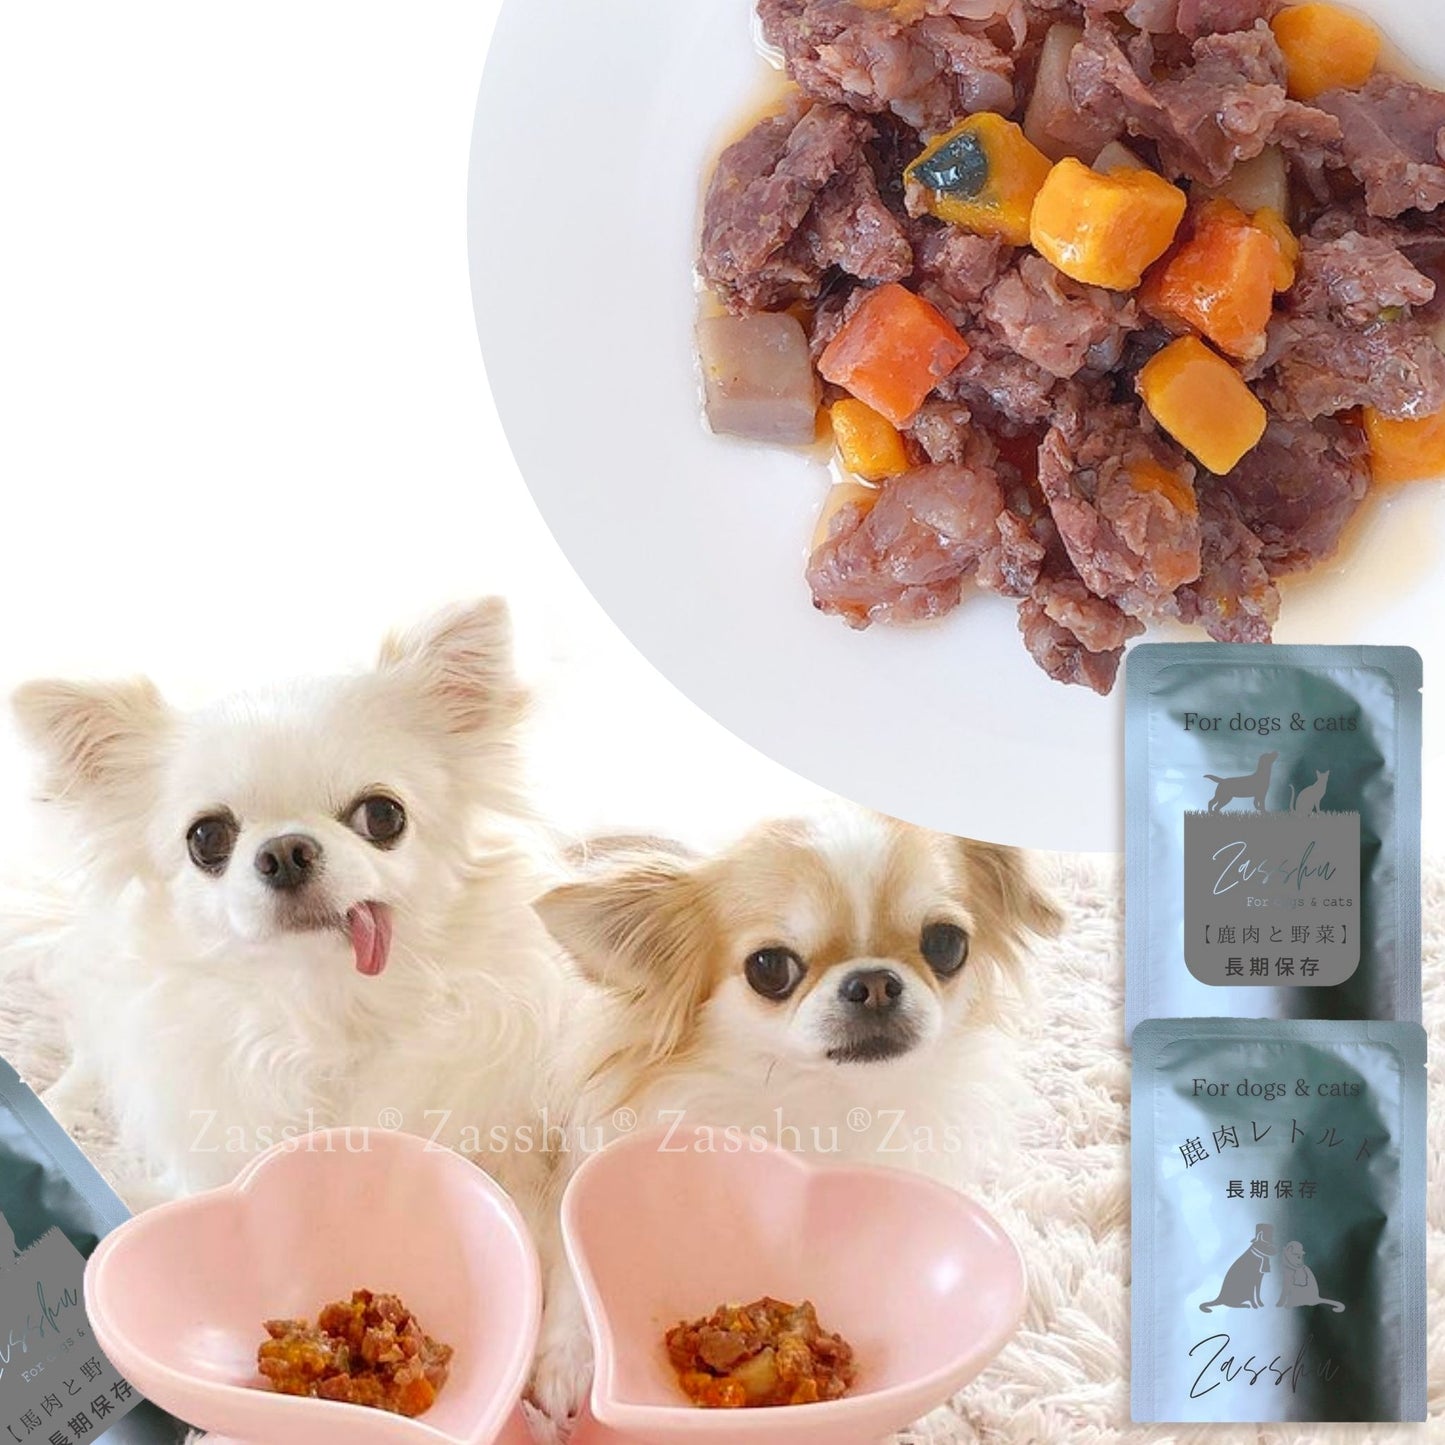 Domestic additive-free, water-free, long-term storage, retort pouch, disaster prevention, outdoor emergency food [retort venison, venison and vegetables] 